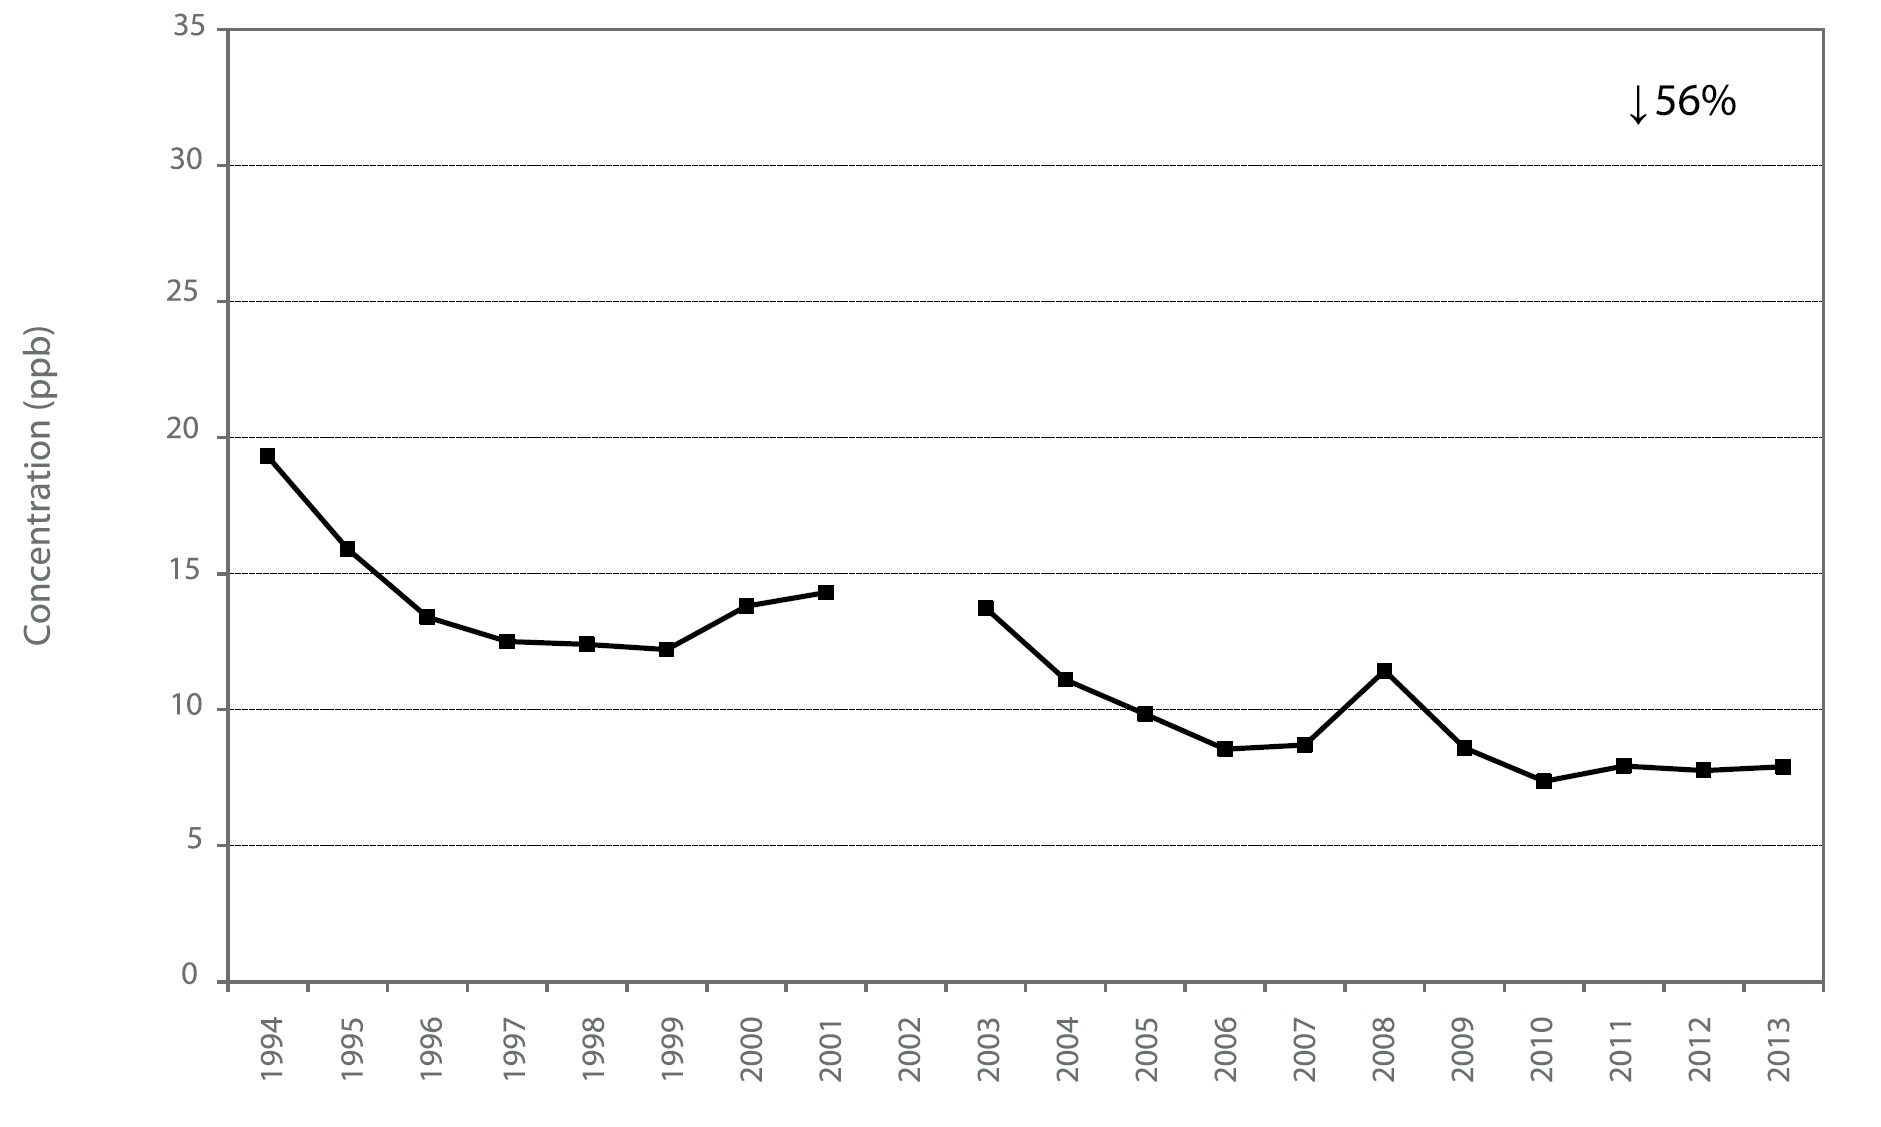 Figure A40 is a line chart displaying the nitrogen dioxide annual mean at Ottawa Downtown from 1994 to 2013. Over this 20-year period, nitrogen dioxide decreased 56%.